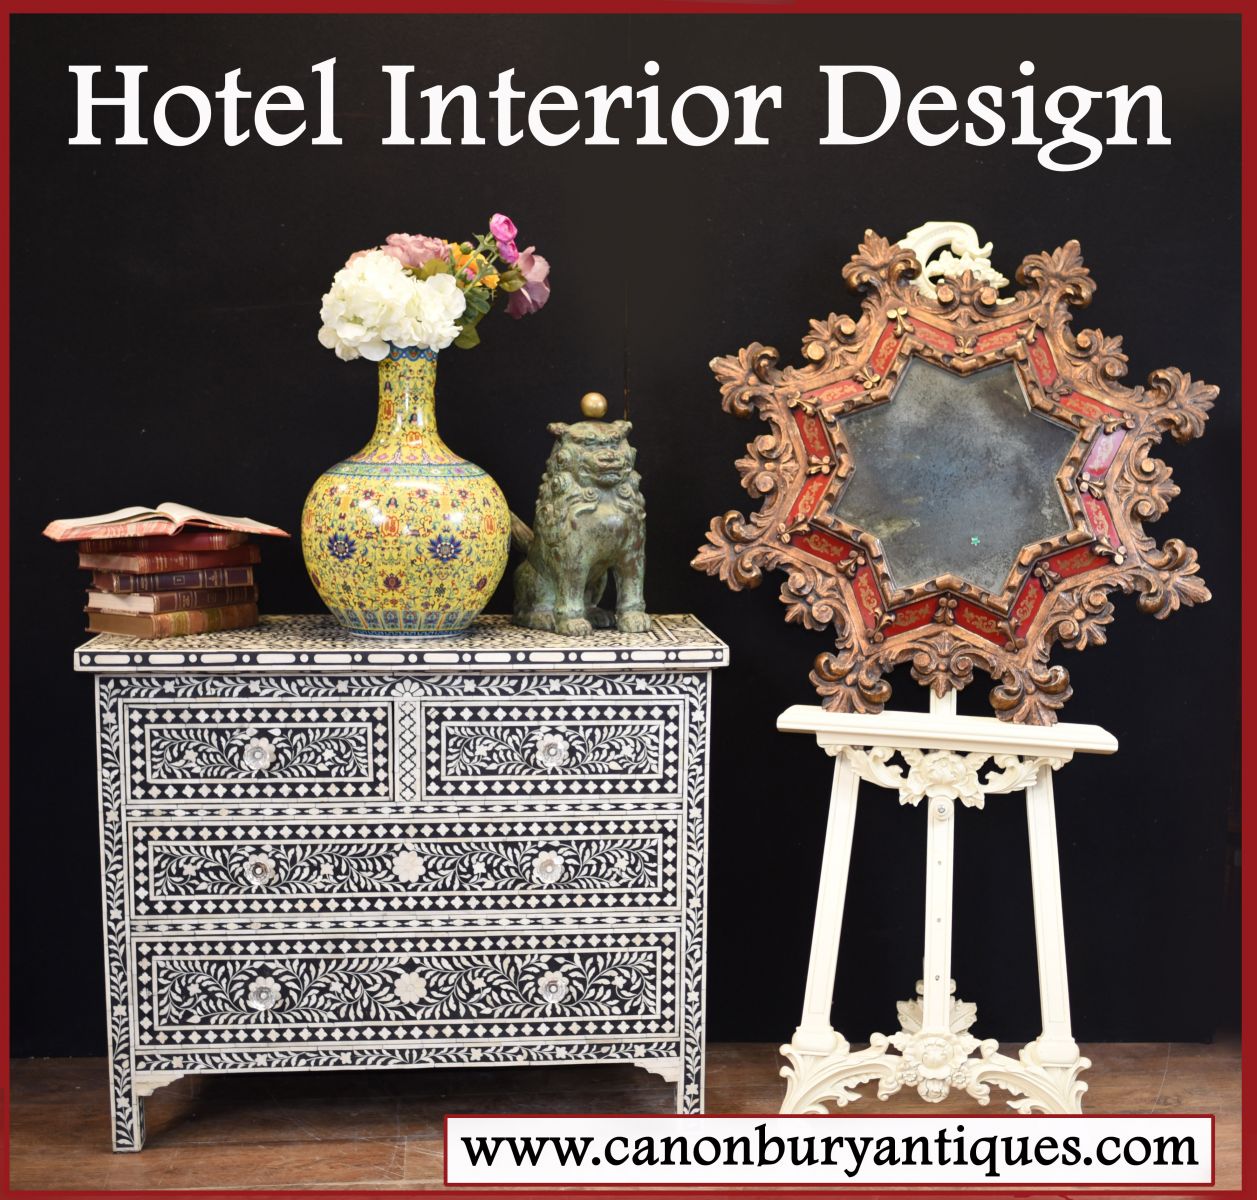 All your needs for your hotel interior design project covered...